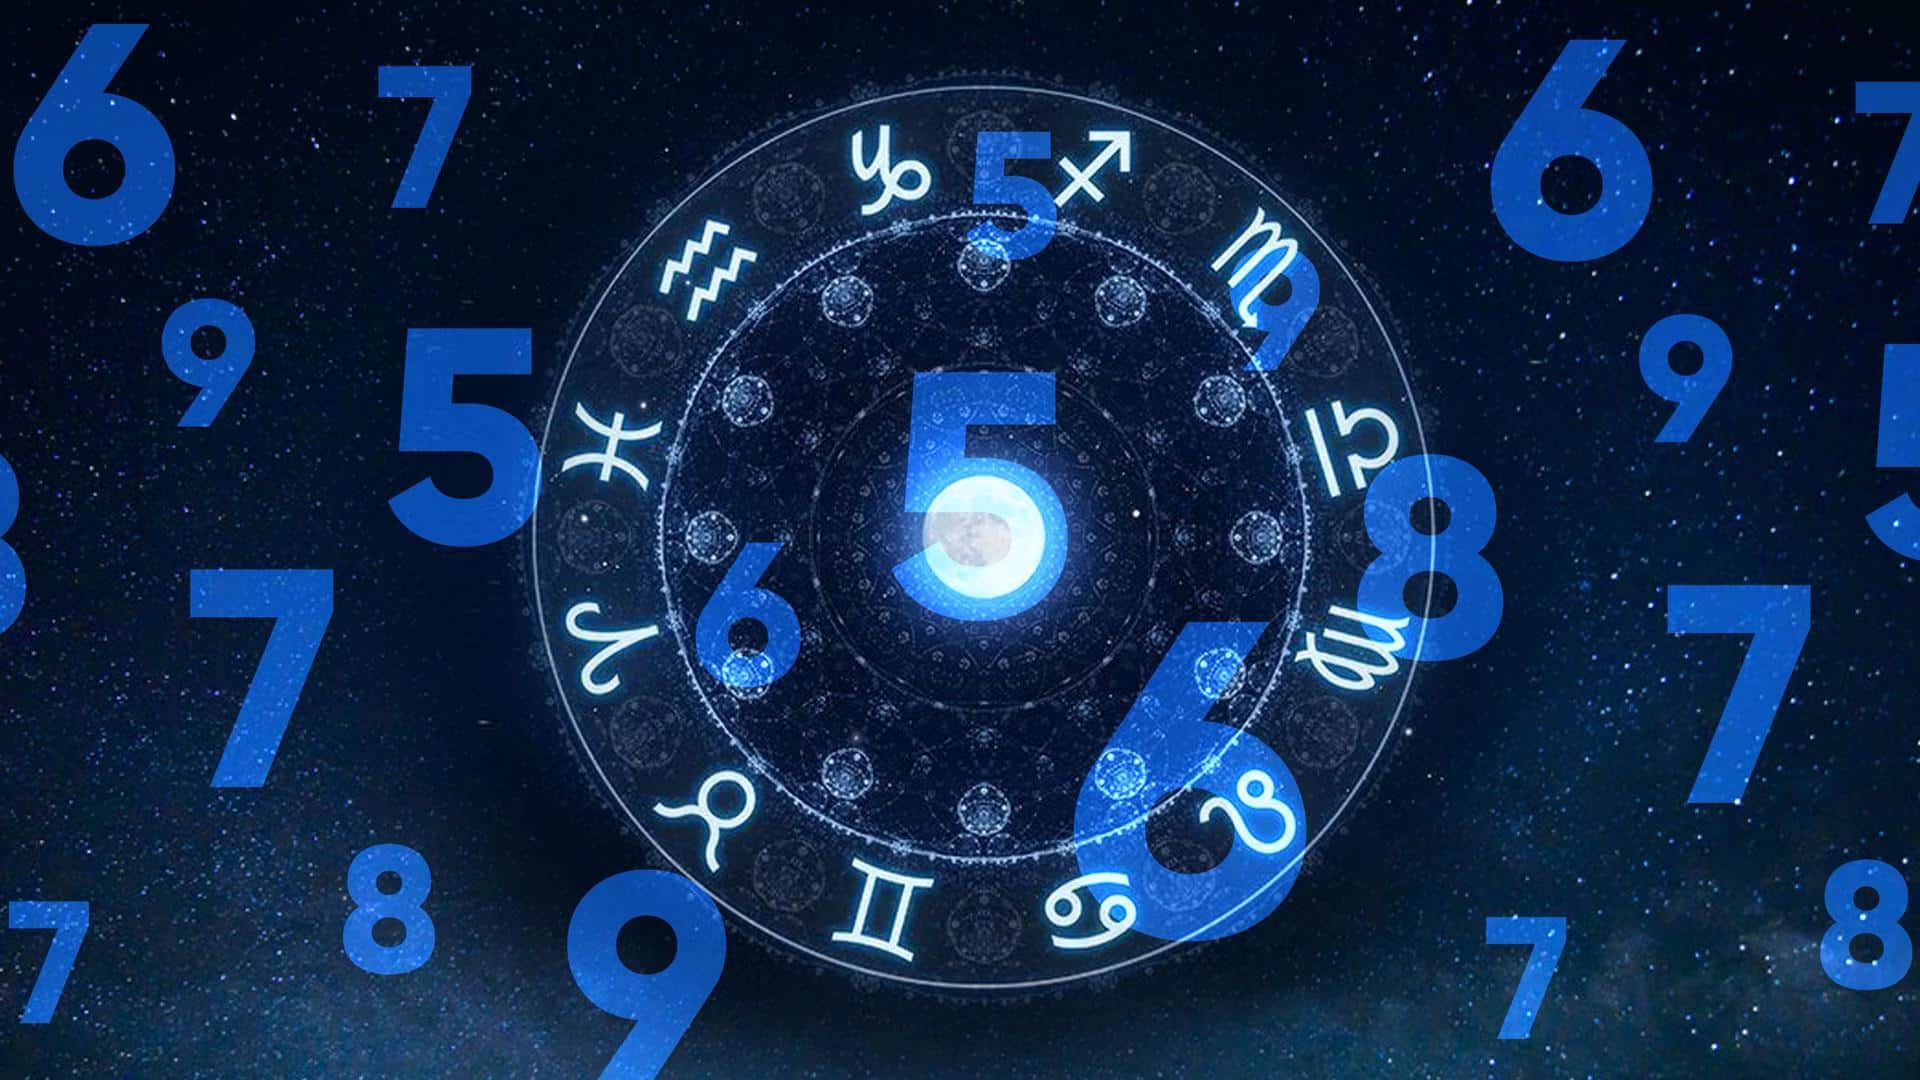 2023 numerology-based predictions for personal year numbers 5 to 9